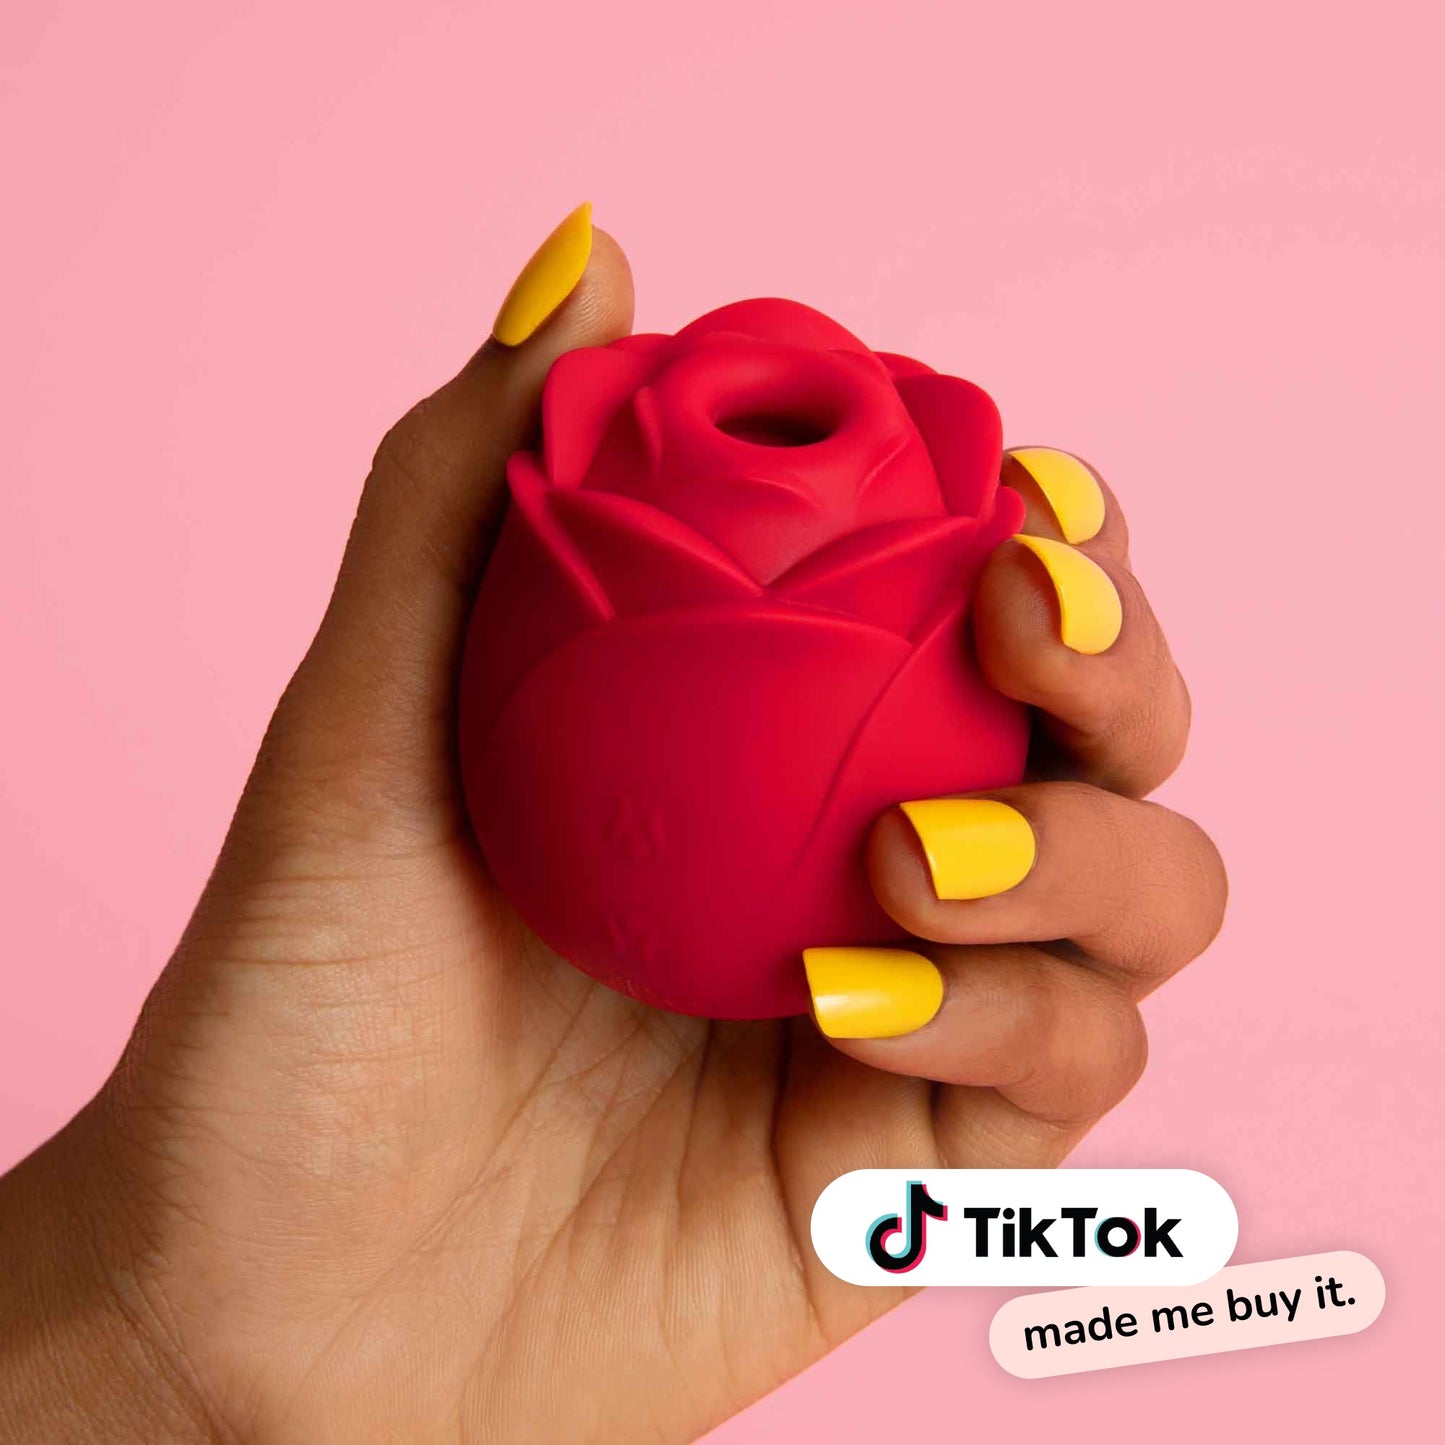 Blossom Suction Rose Toy red rose toy for women with tiktok badge